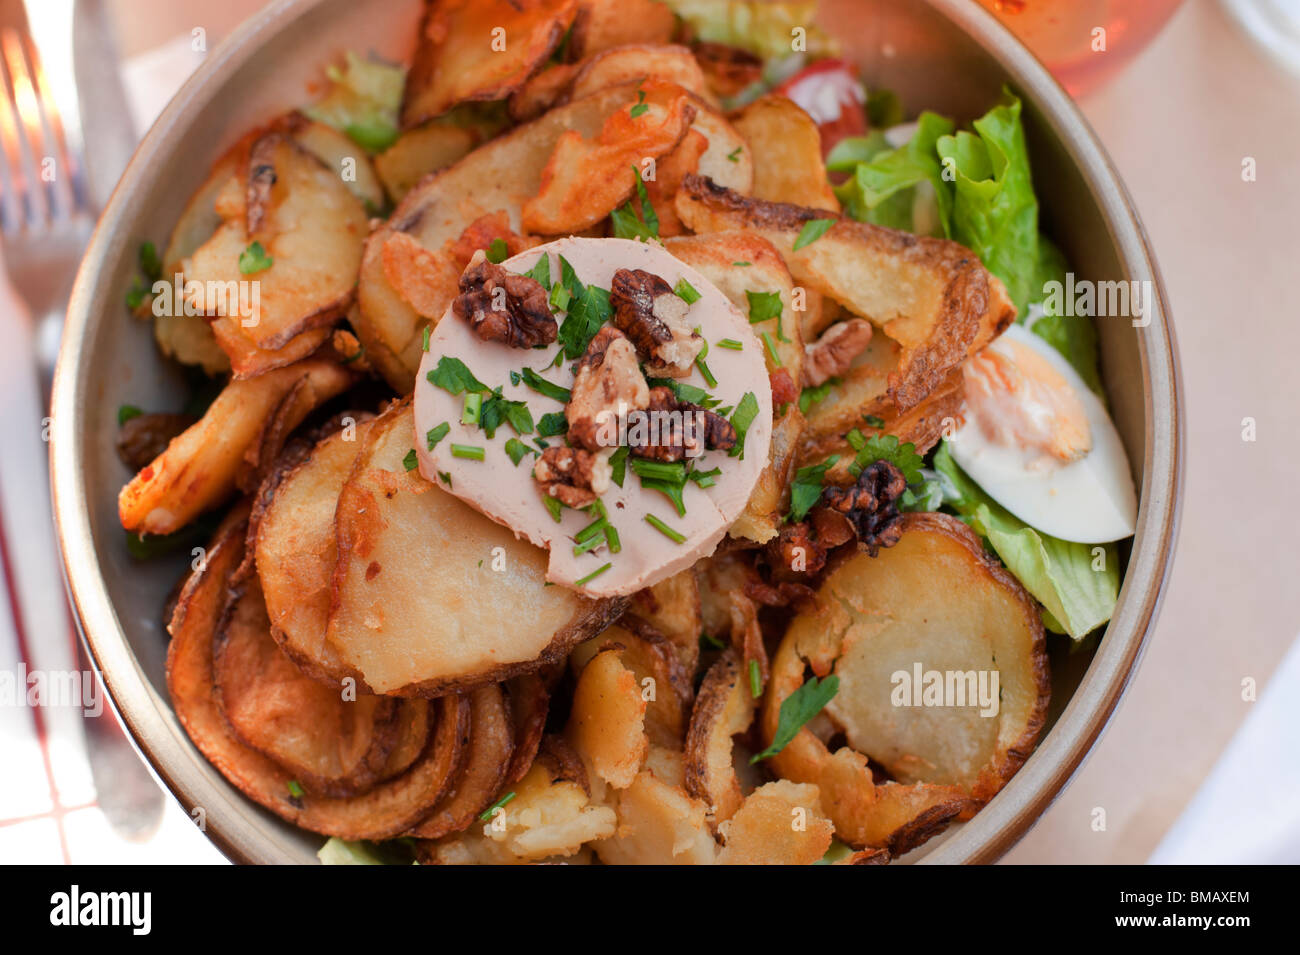 A salad is topped with fried potatoes, sliced hard-boiled egg, and foie gras at a restaurant in Paris Stock Photo